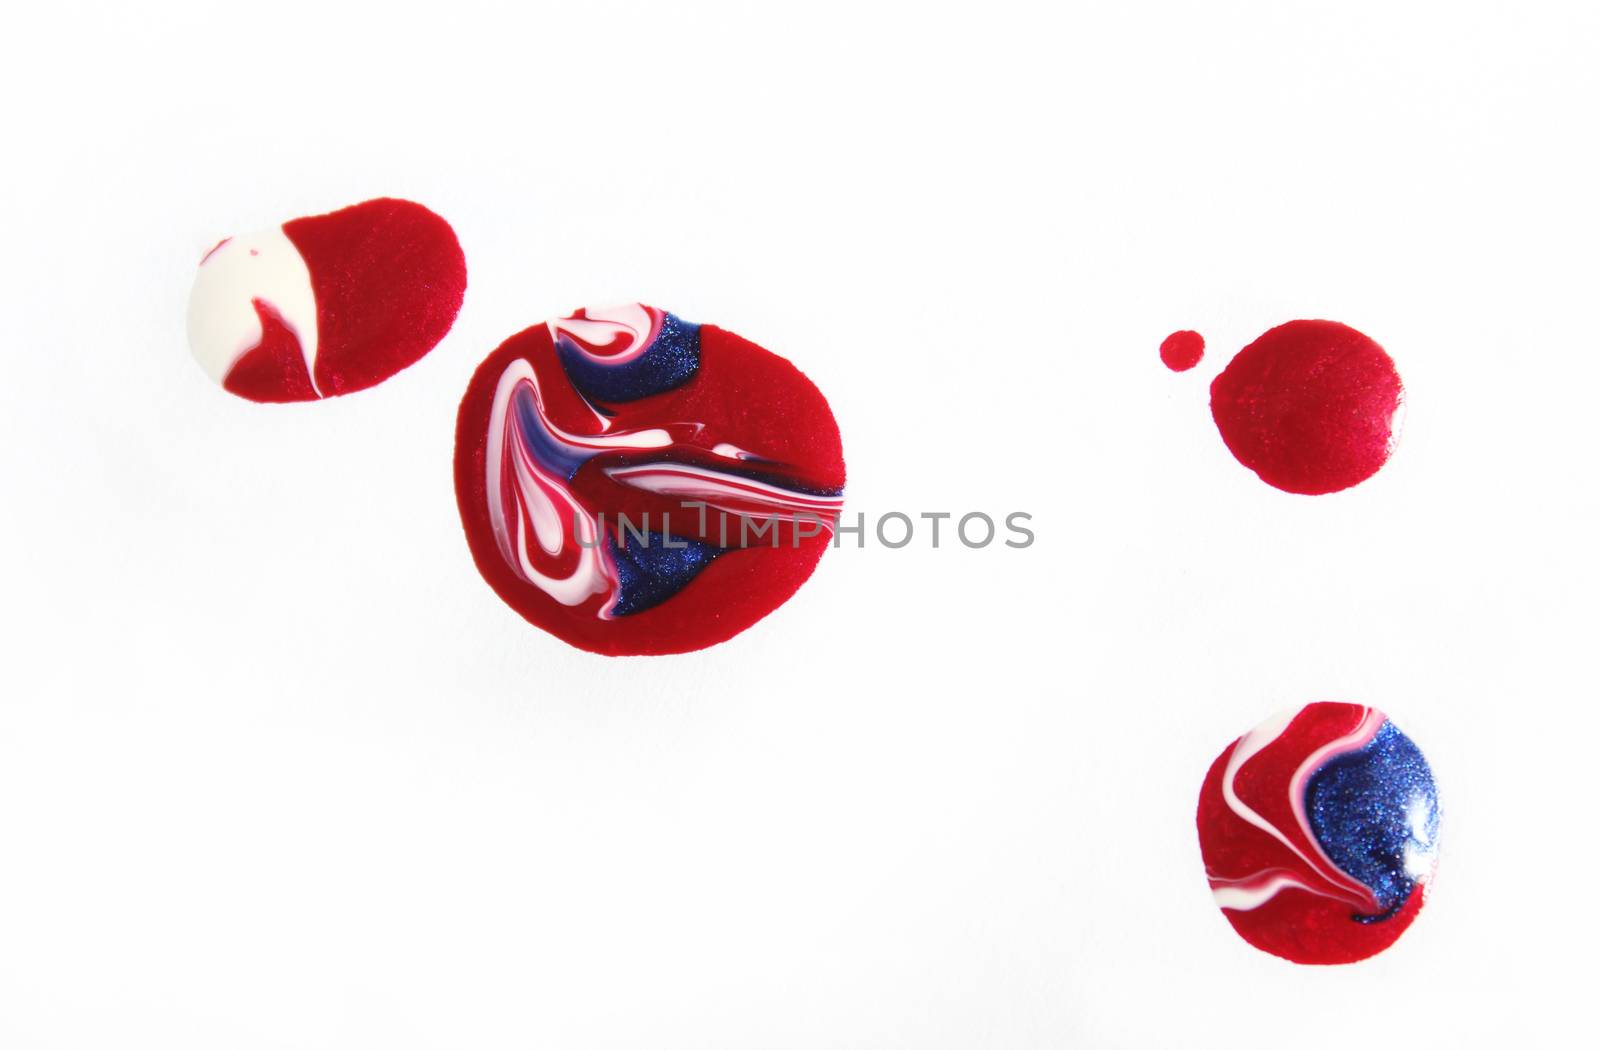 Red, White and Blue Nail Polish Spilled on White by Marti157900